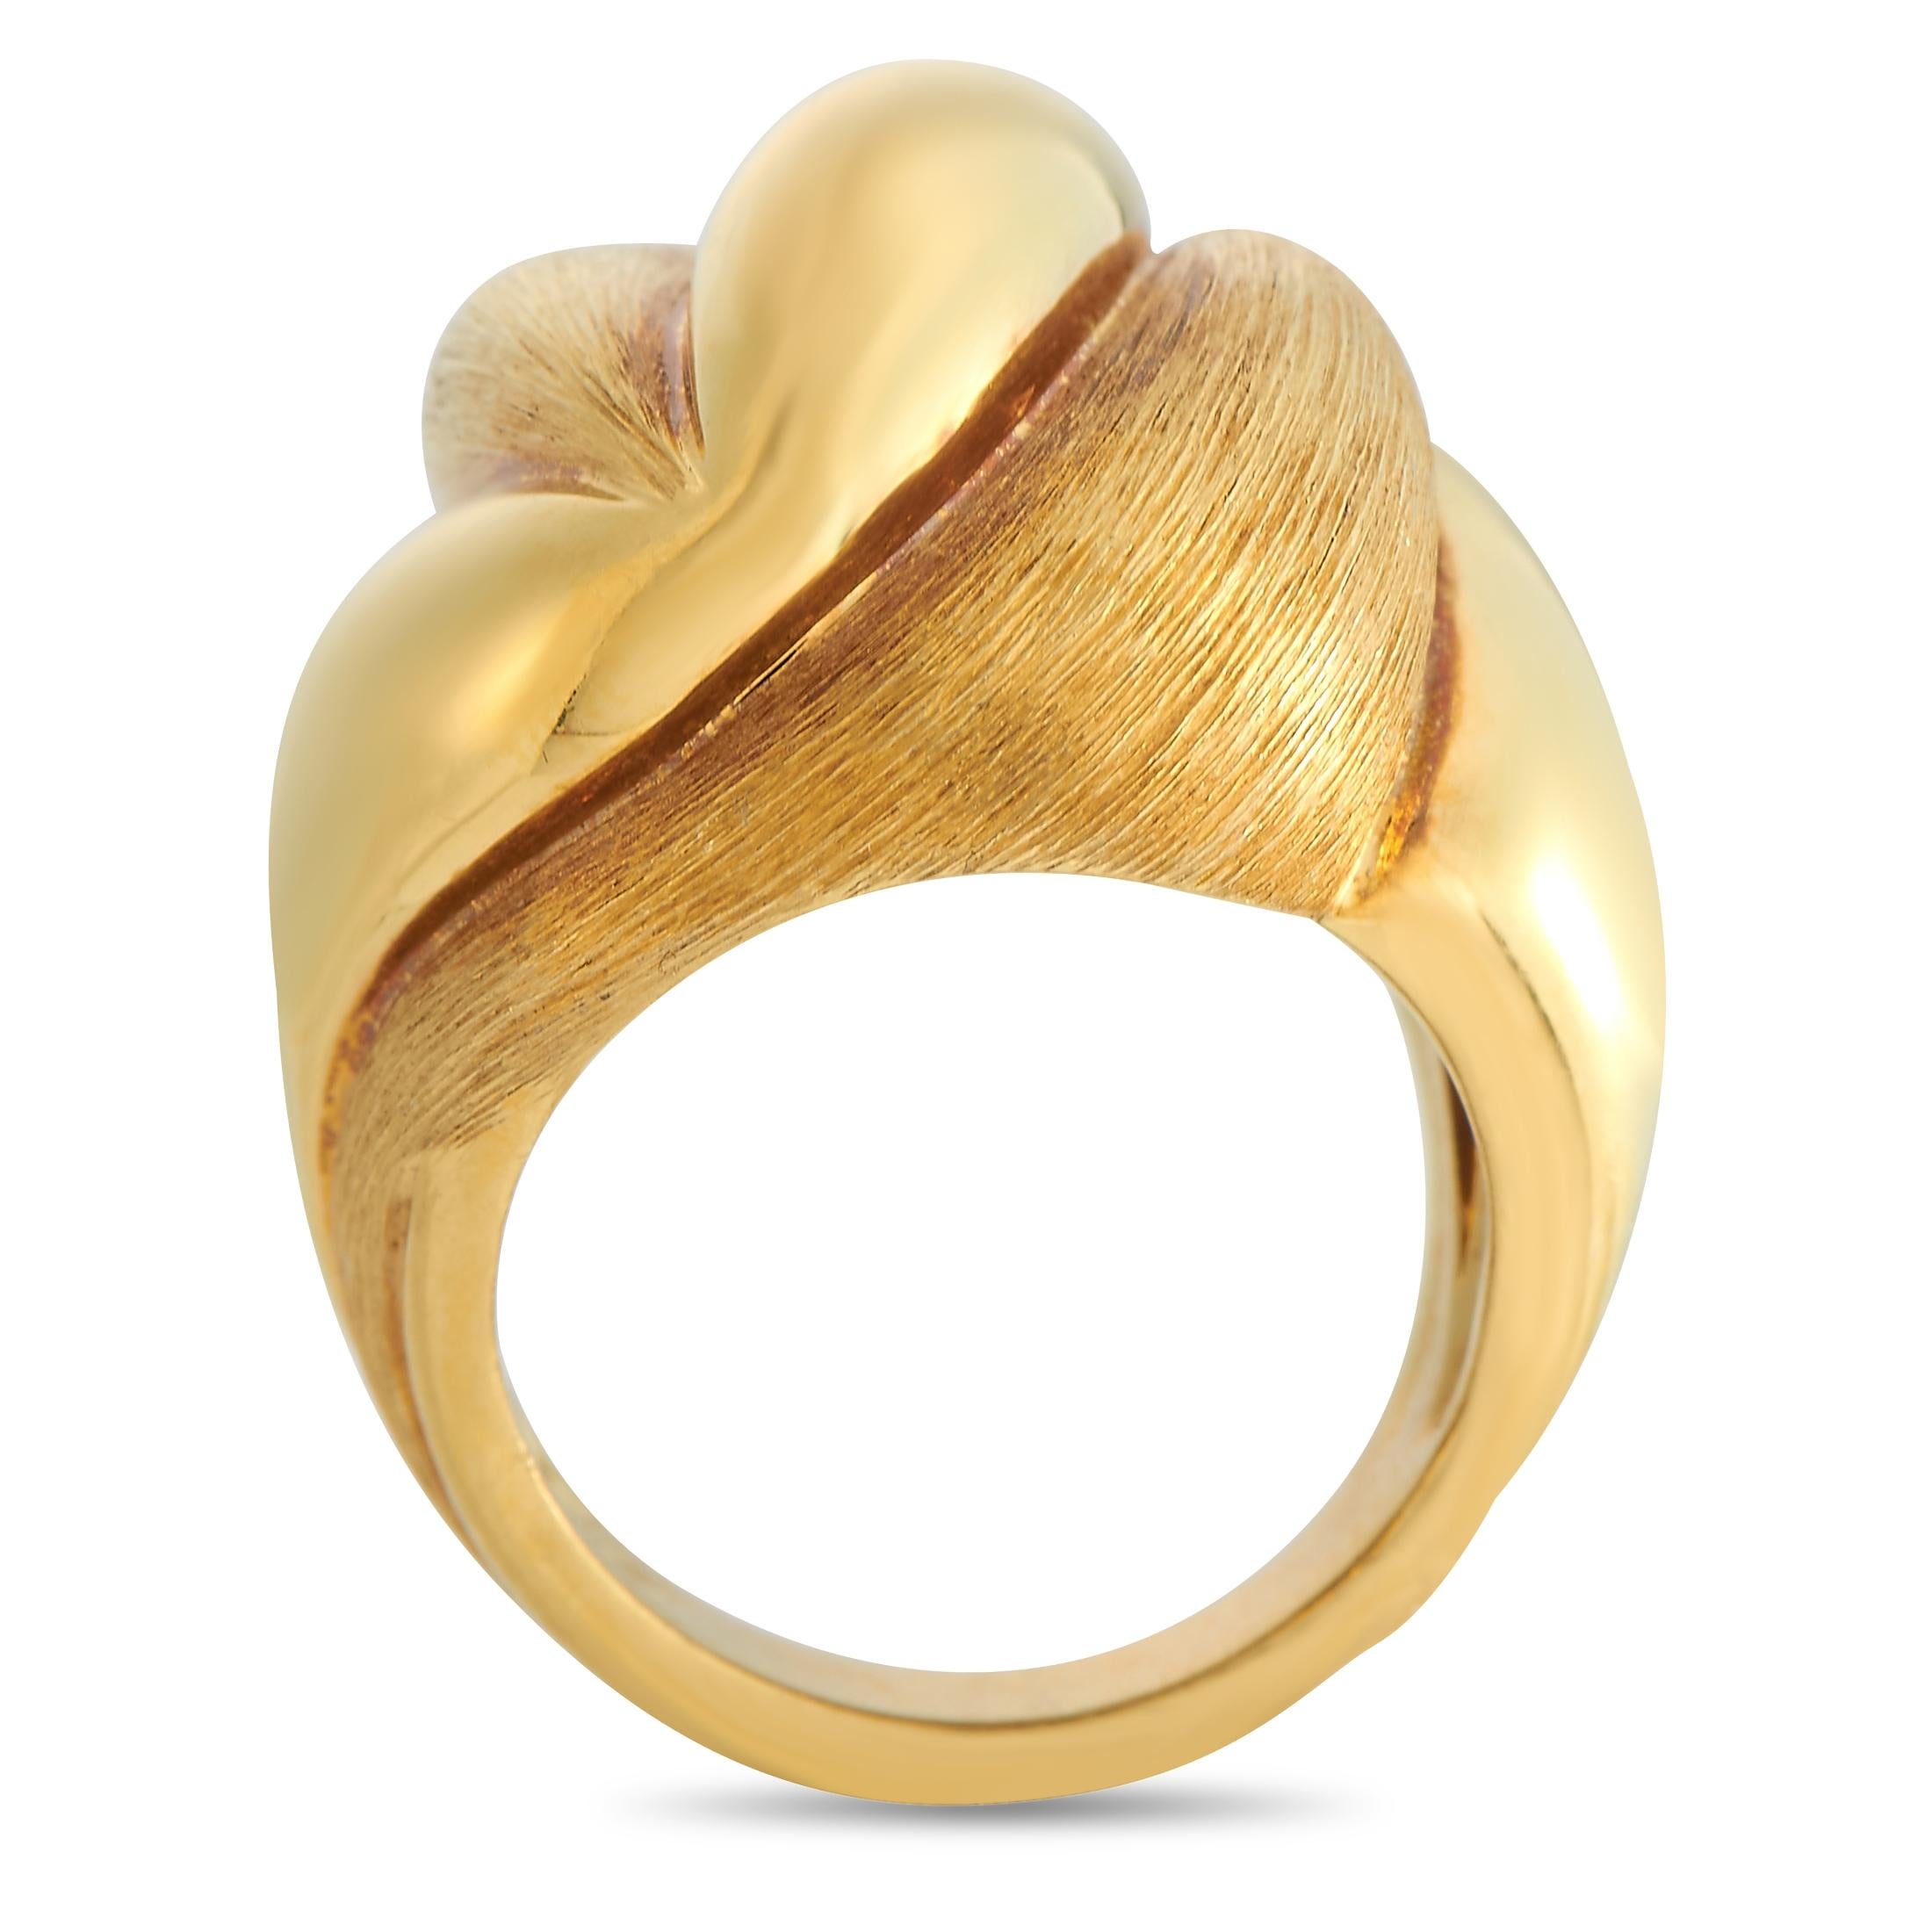 This Henry Dunay ring is a minimalist piece with a striking sense of style. It includes 18K Yellow Gold with both a textured and polished finish. The result is an instantly captivating ring that is equal parts subtle and sophisticated. This graceful